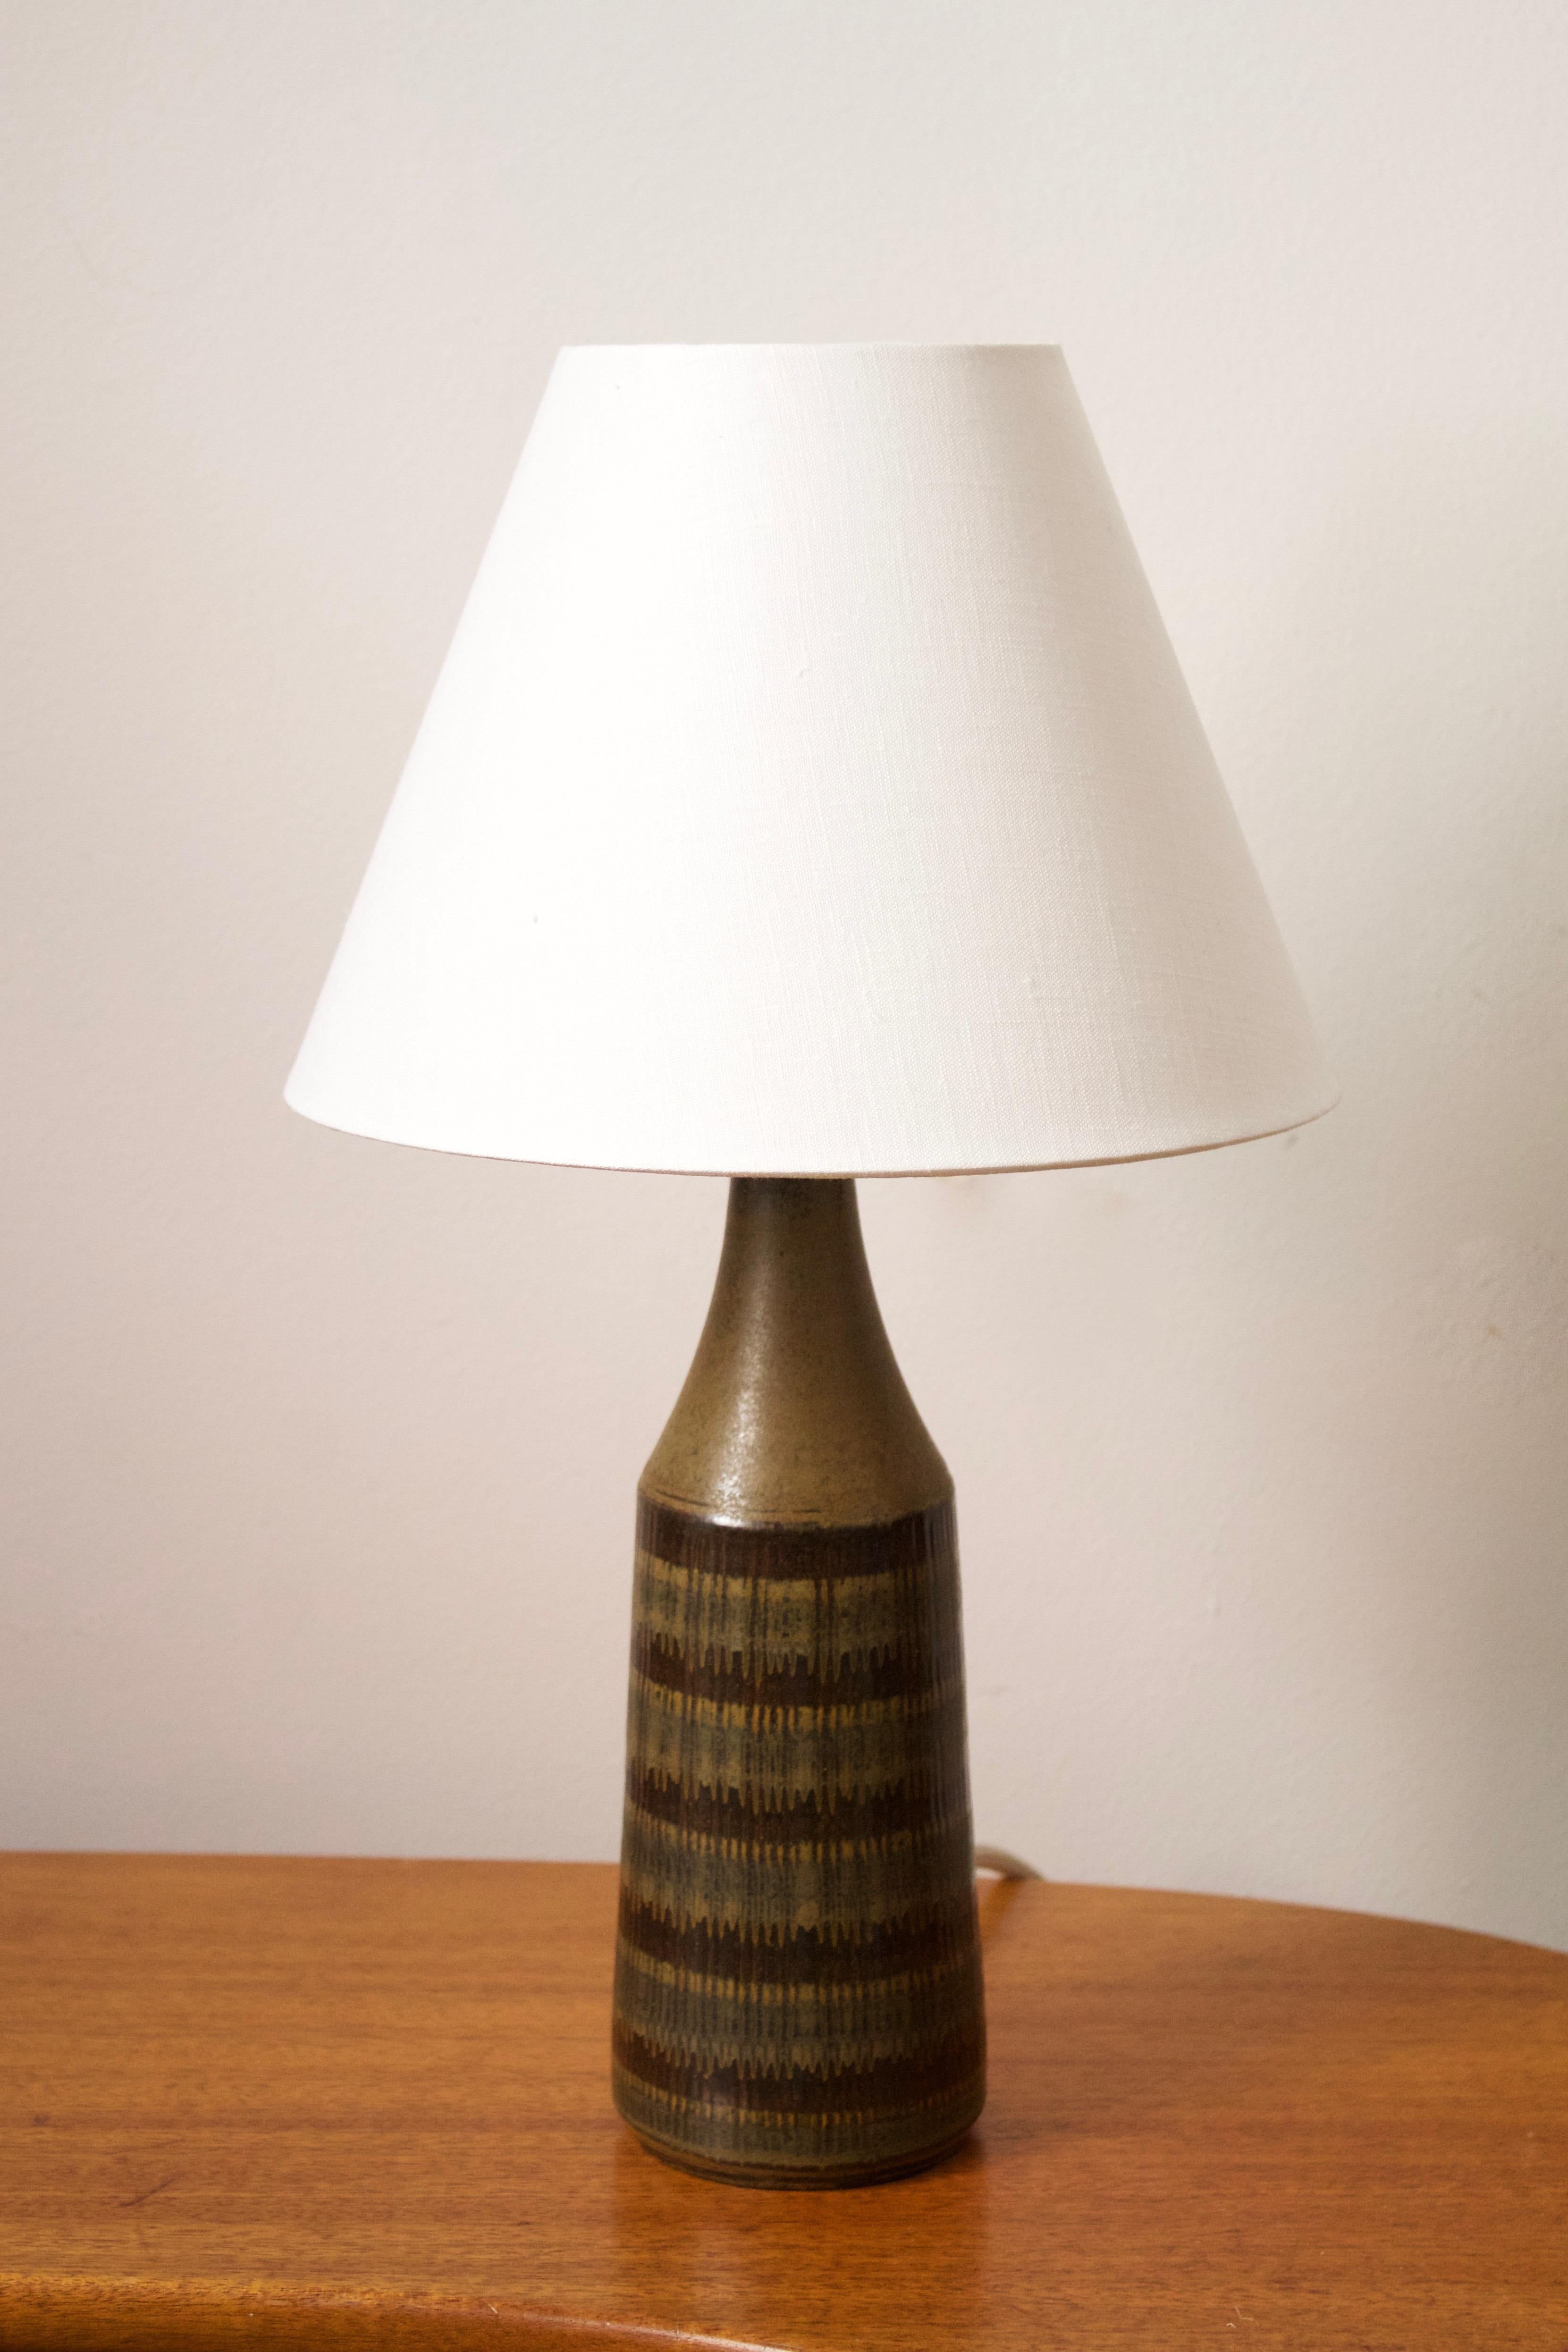 A table lamp. Designed and produced by Wallåkra, Sweden, 1960s. Features simple hand-painted and incised decoration.

Stated dimensions exclude lampshade. Height includes socket. Sold without lampshade.

Glaze features a brown-green color.

Other